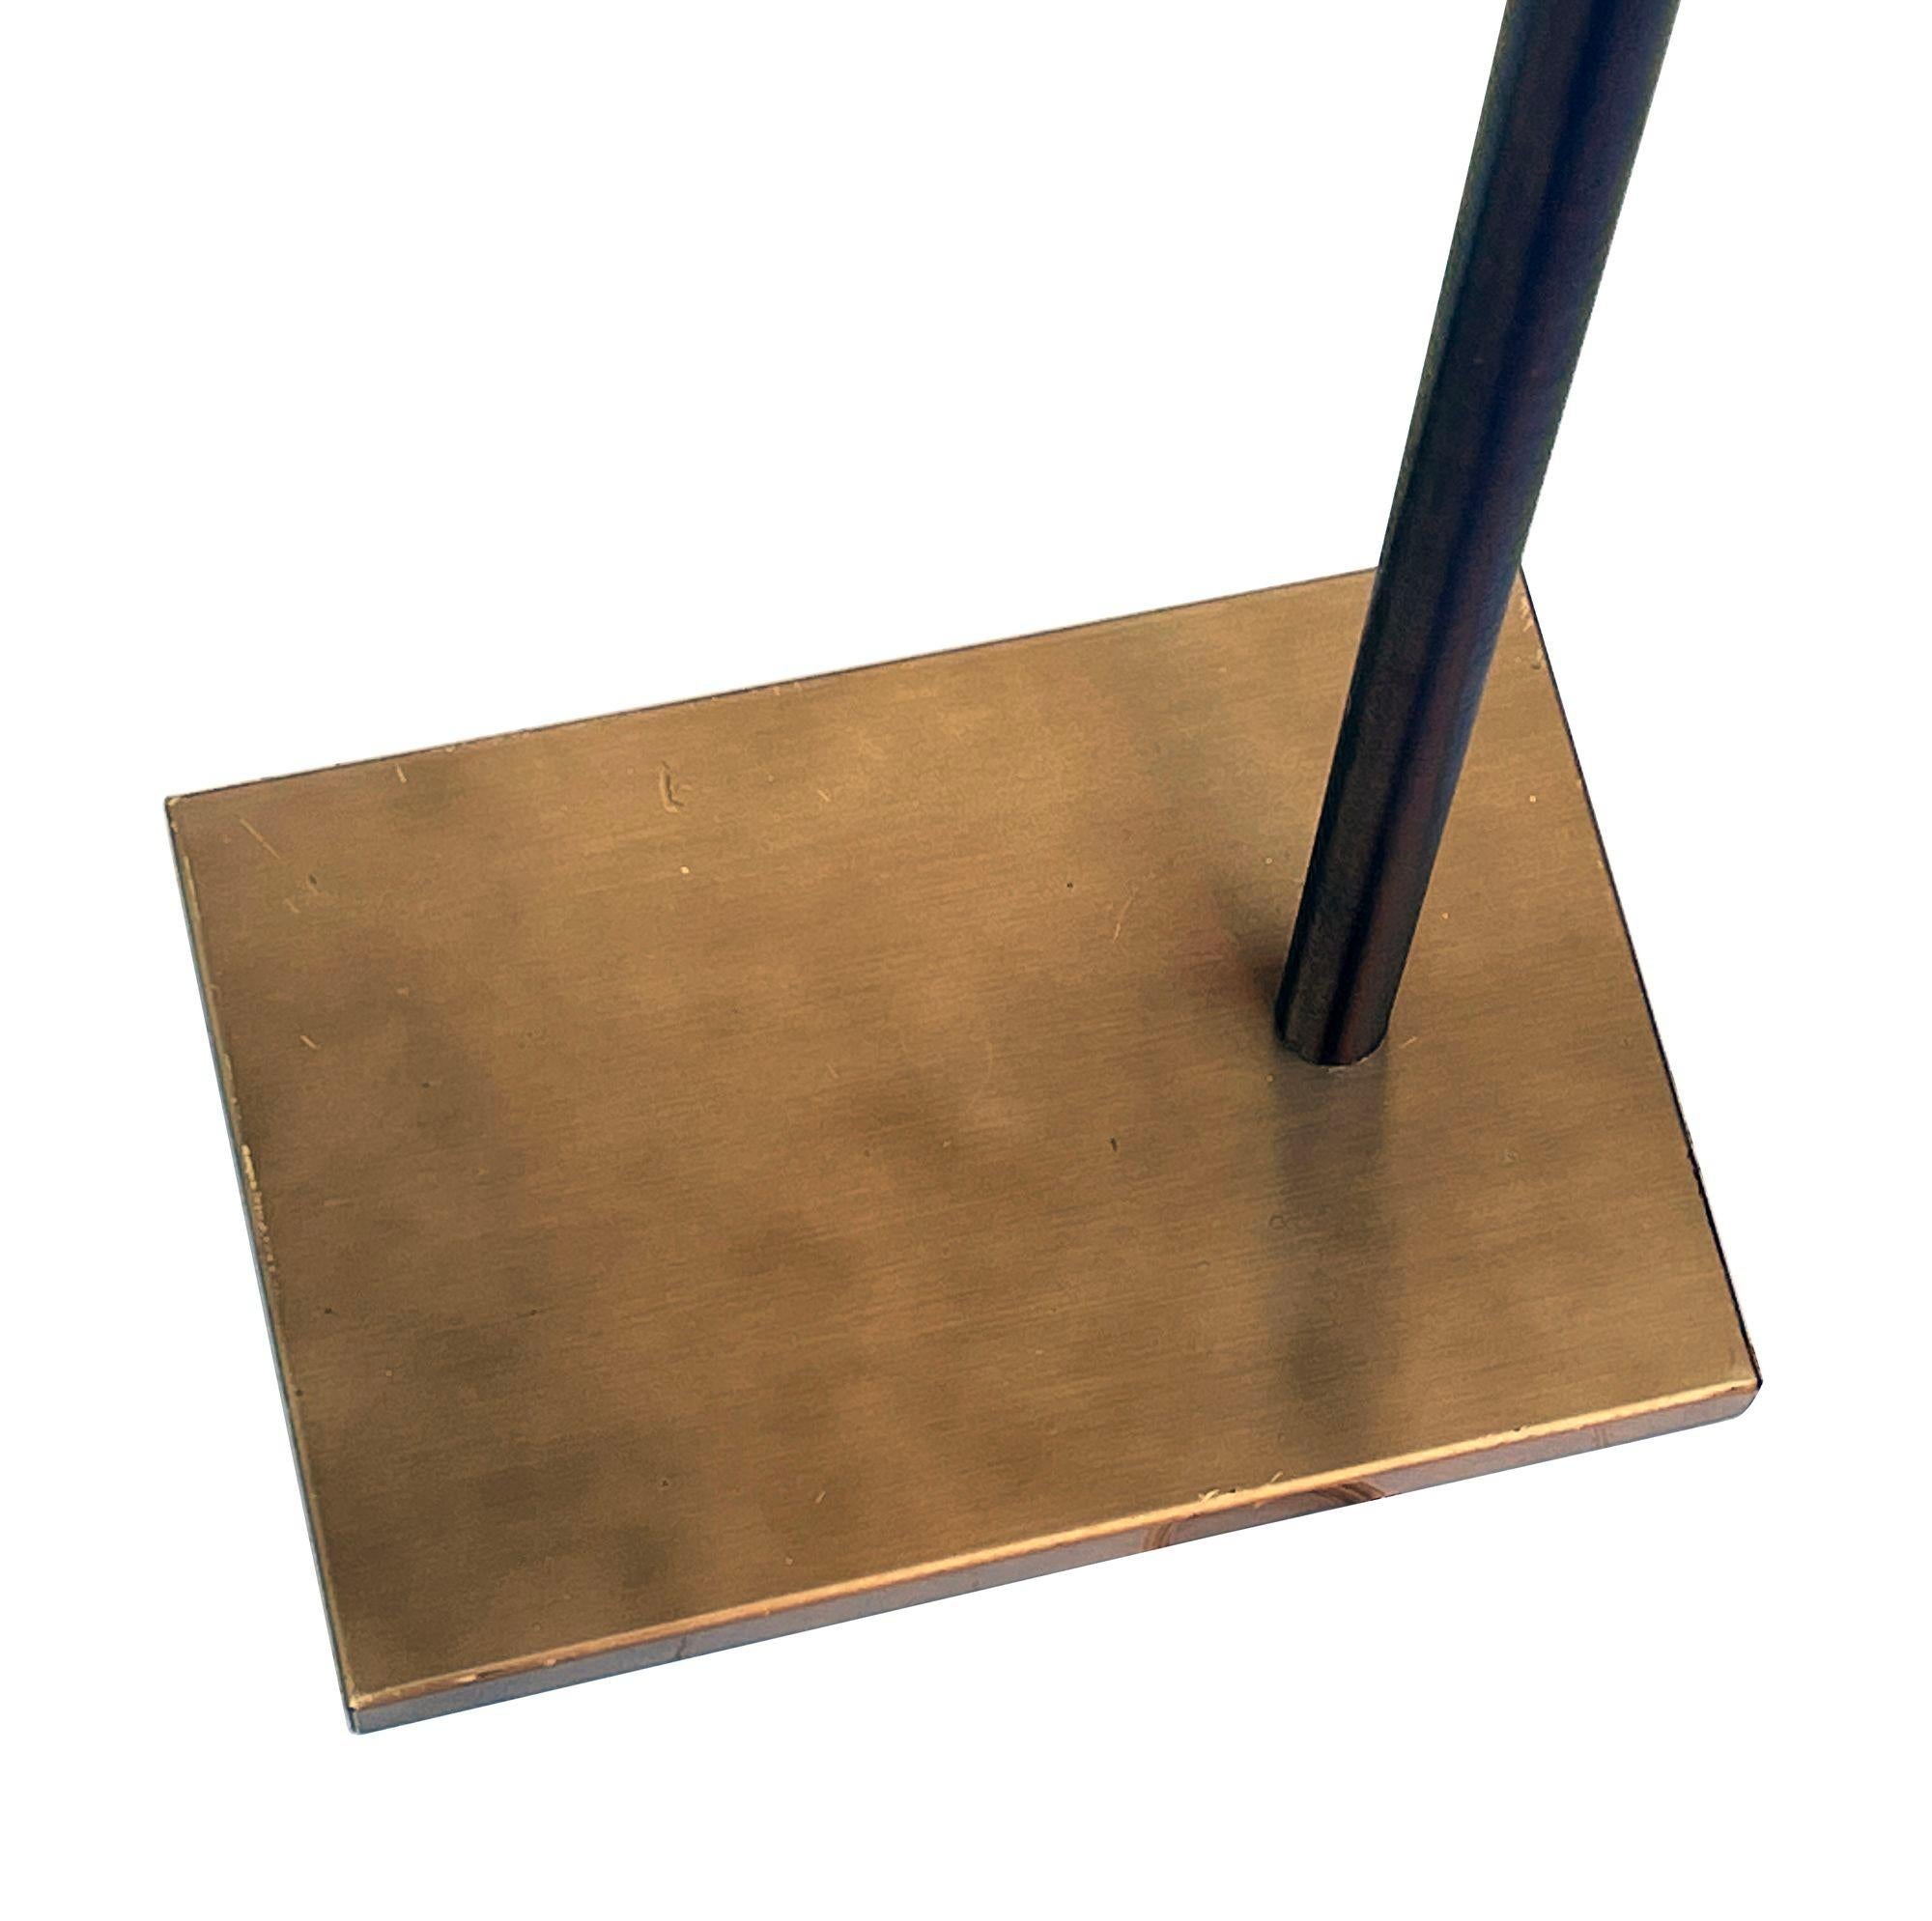 USA, 1980s
Koch + Lowy adjustable floor lamp in antique brass finish. Weighted base, highly adjustable classic library lamp.
The lamp adjusts in height from about 37” to 45” H. The shade pivots to direct the light where desired; lamp has a dimmer,